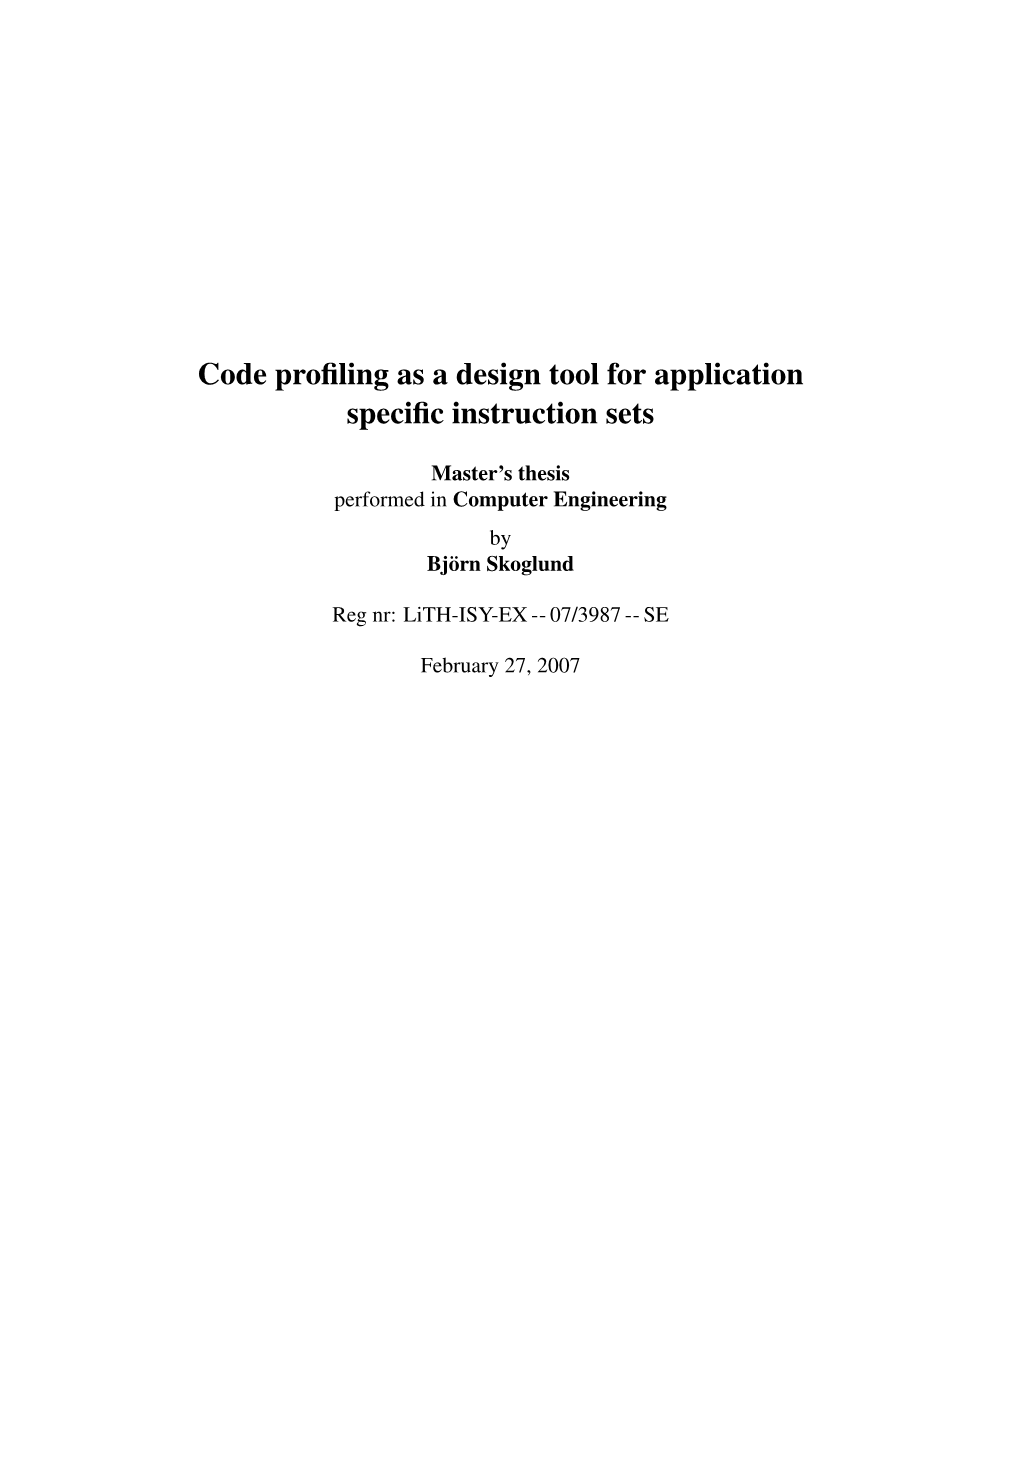 Code Profiling As a Design Tool for Application Specific Instruction Sets